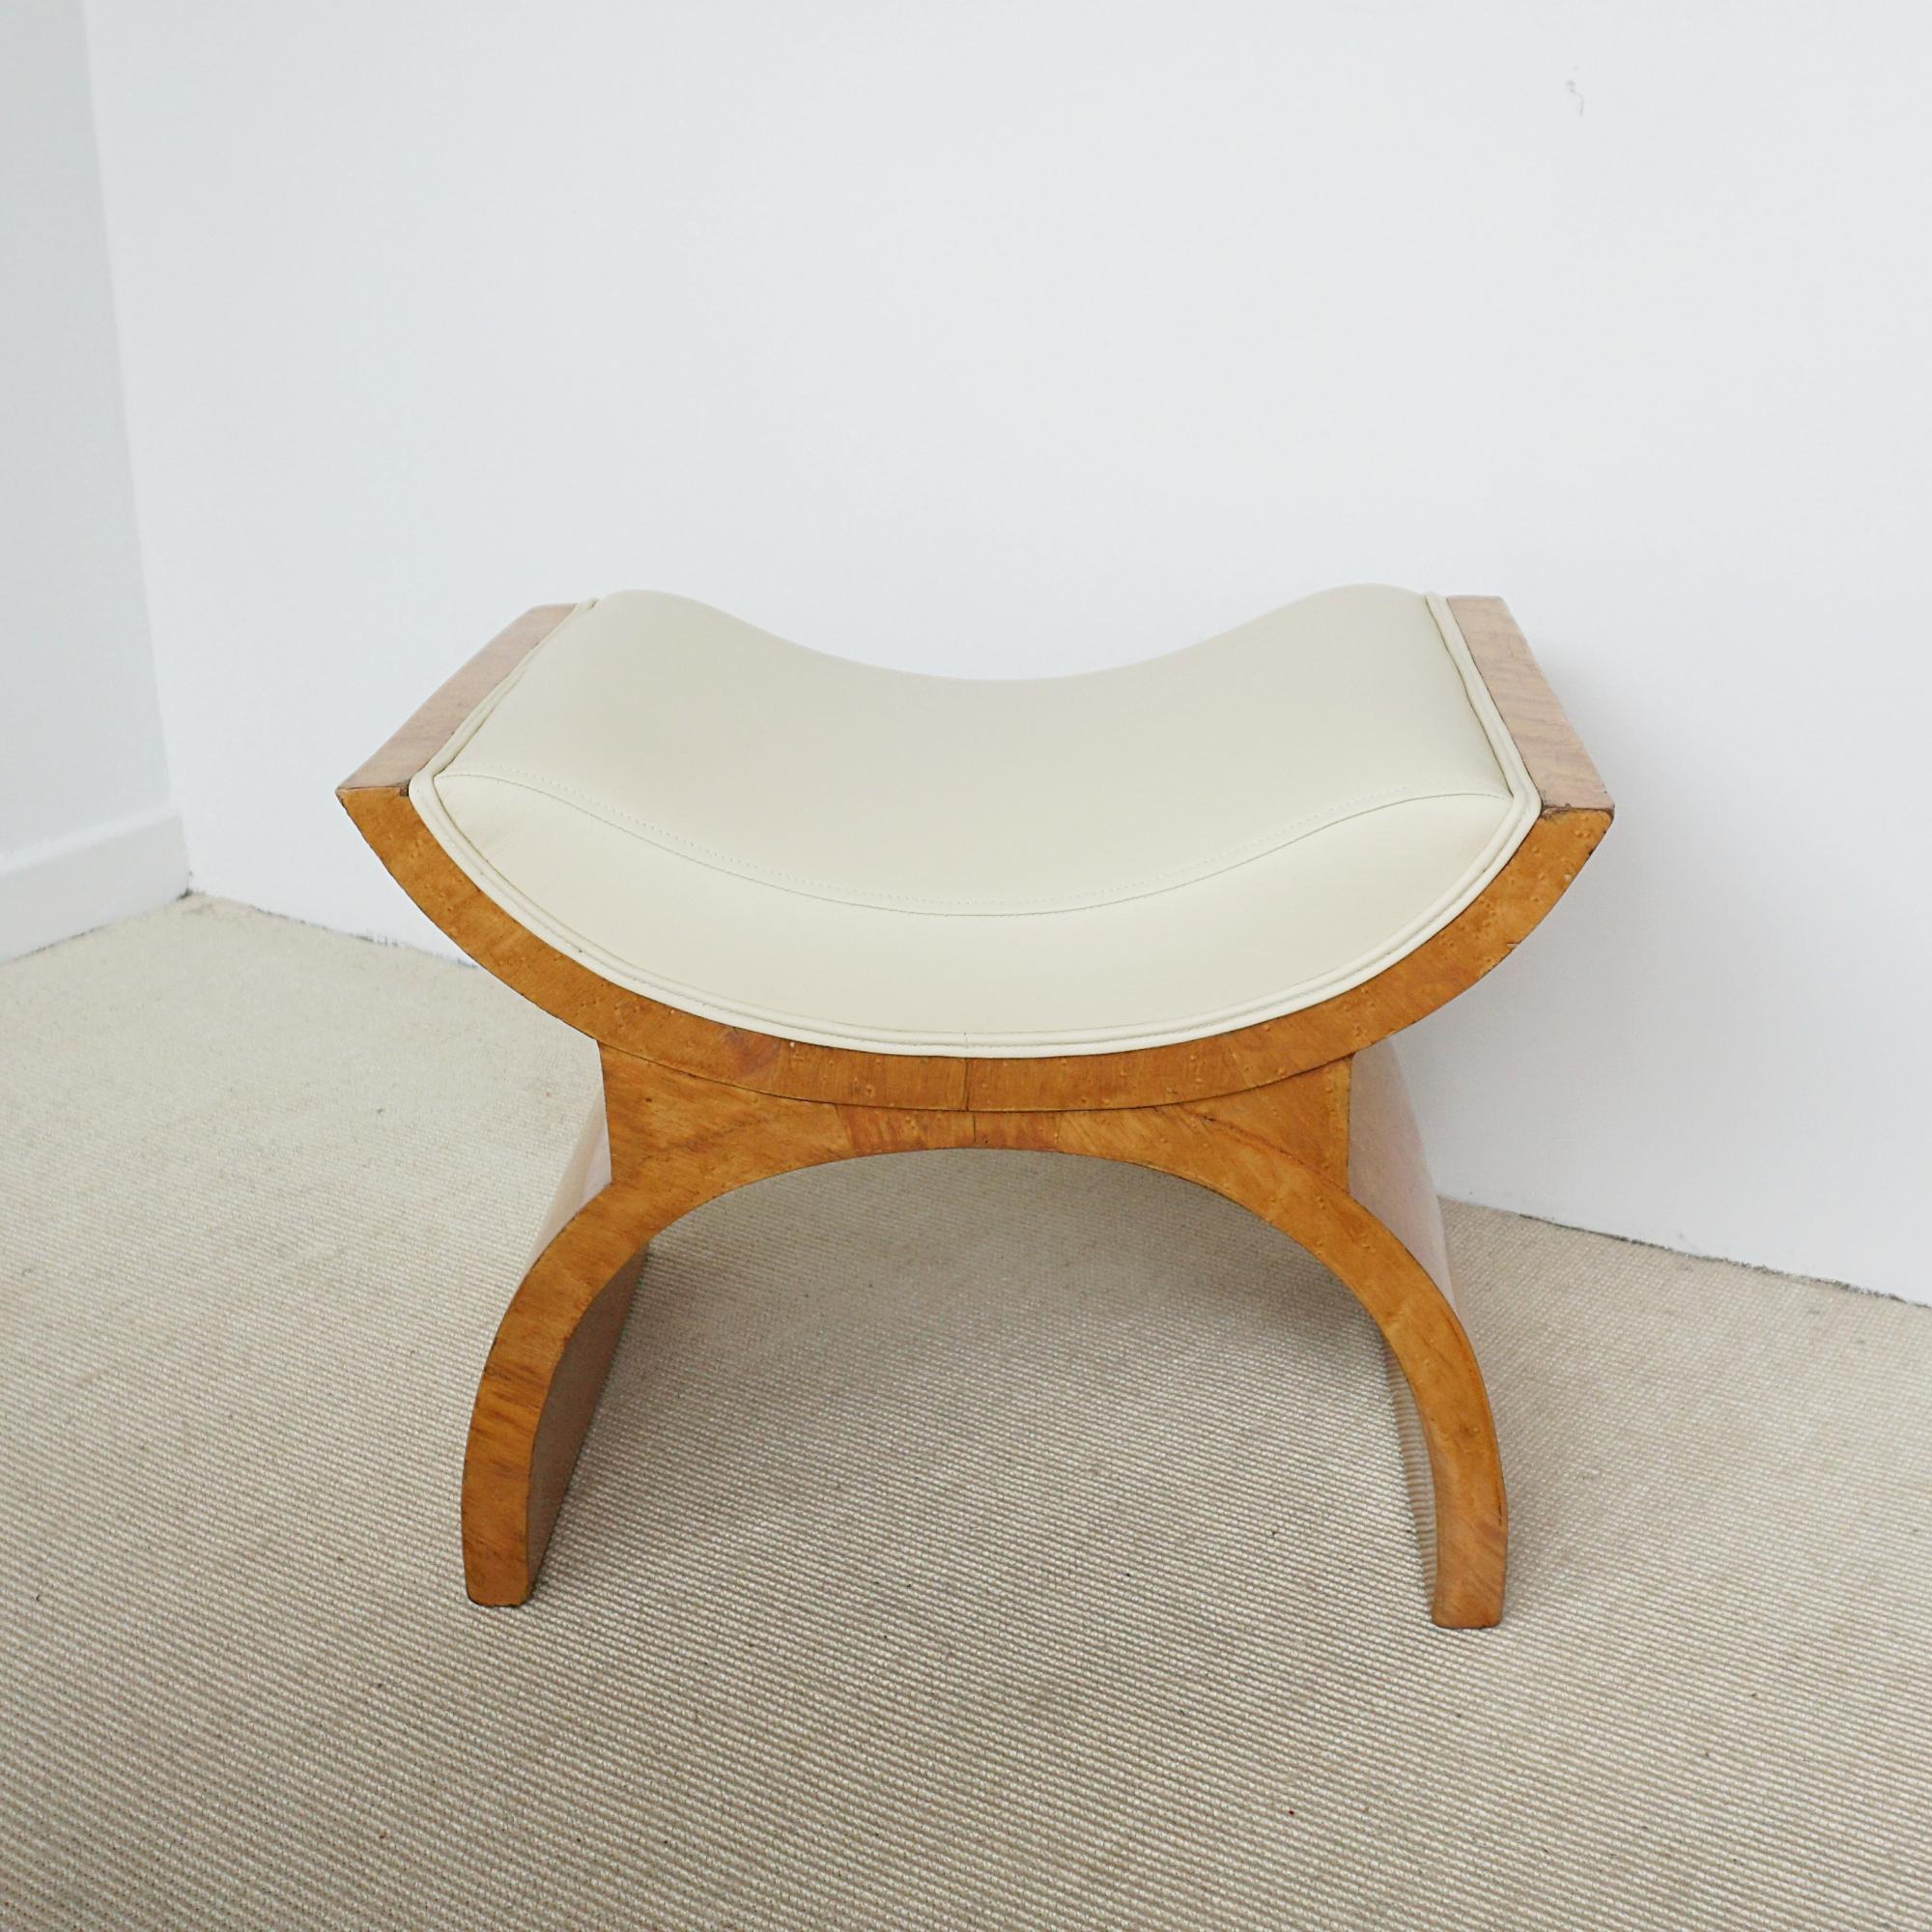 An Art Deco X-Framed stool by Harry & Lou Epstein. Birdseye maple veneered with cream leather re-upholstery. 

Dimensions: H 45cm W 60cm D 45cm

Origin: English

Date: Circa 1935

Item Number: 3004243